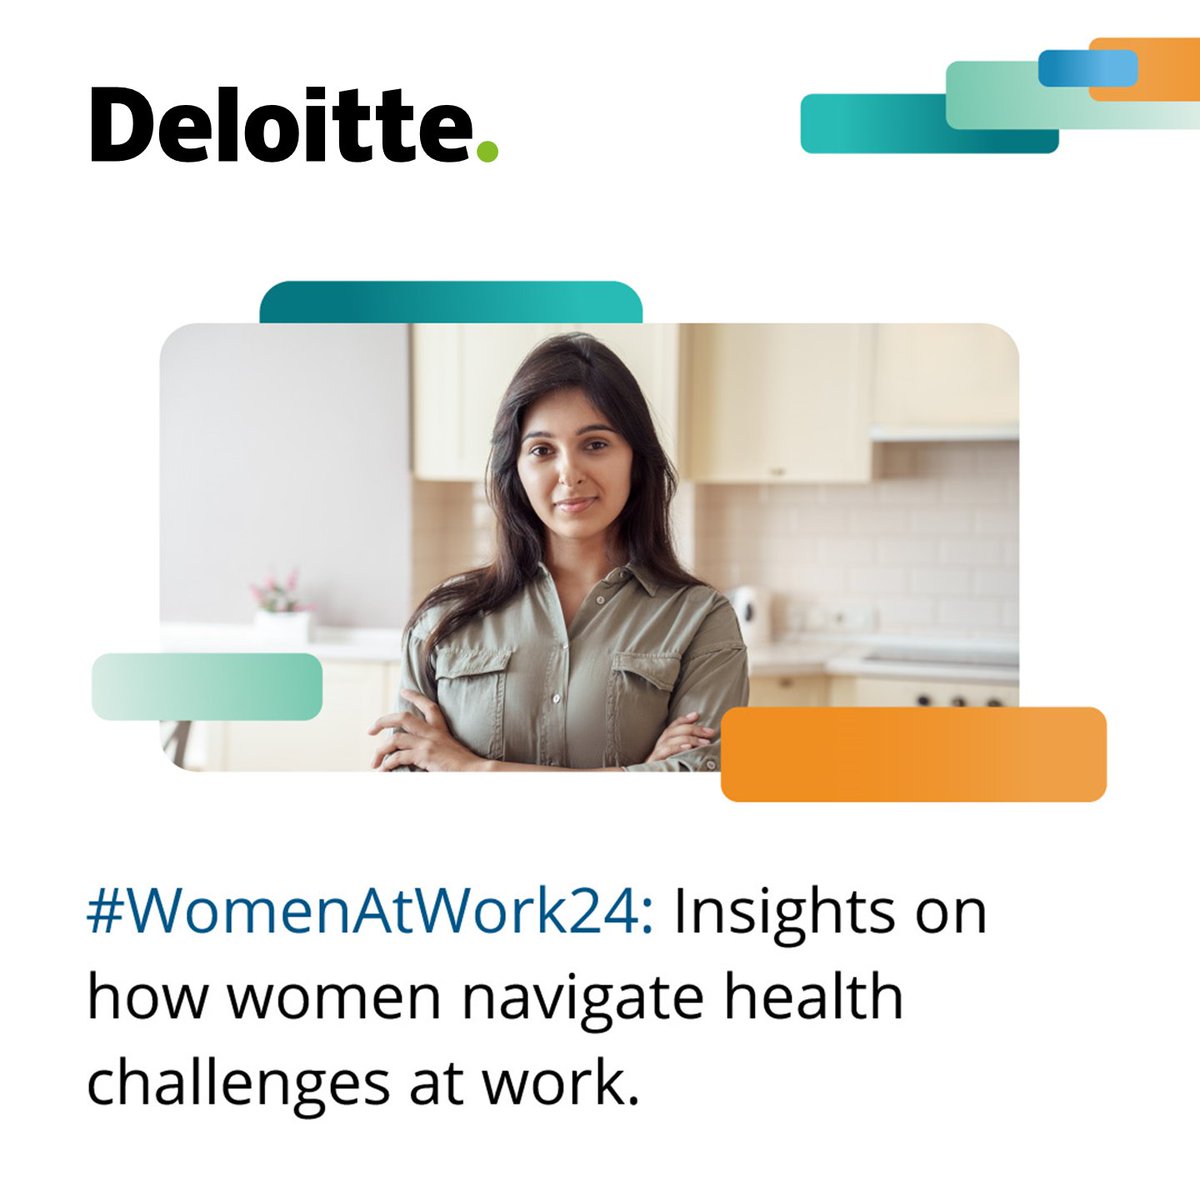 Many women experiencing health challenges are working through pain or related symptoms—with this increasing over last year when it comes to menopause.

Learn more in #WomenAtWork24: deloi.tt/3yaalmJ
#WomensHealth #WorlLifeBalance